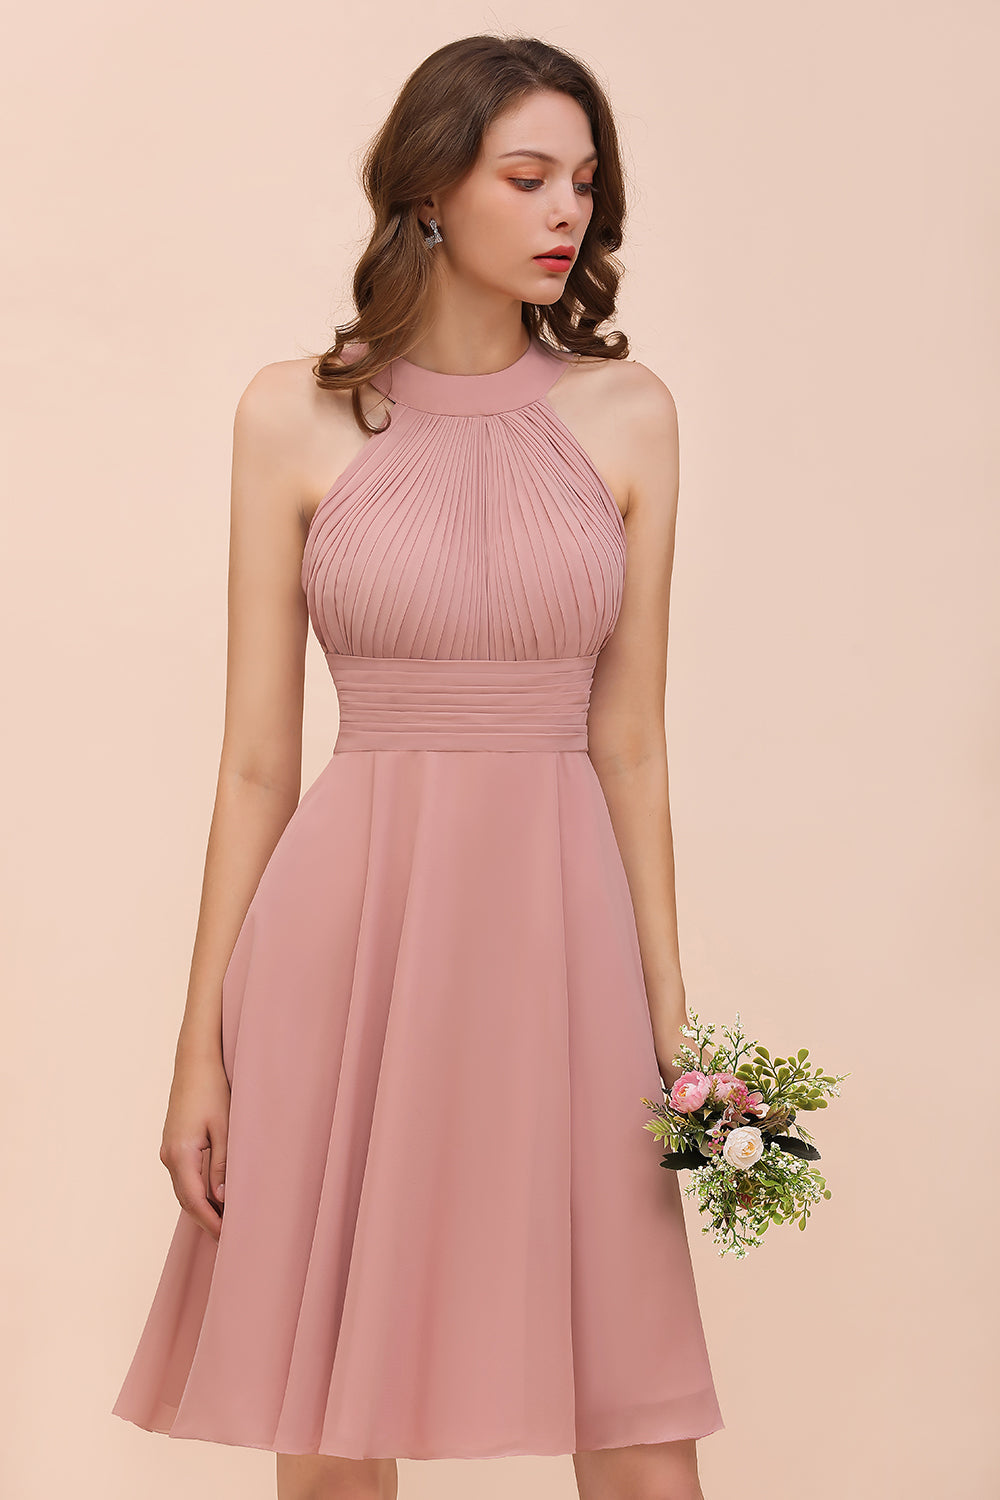 Affordable Dusty Pink Round Neck Ruffle Short Bridesmaid Dresses Online-27dress